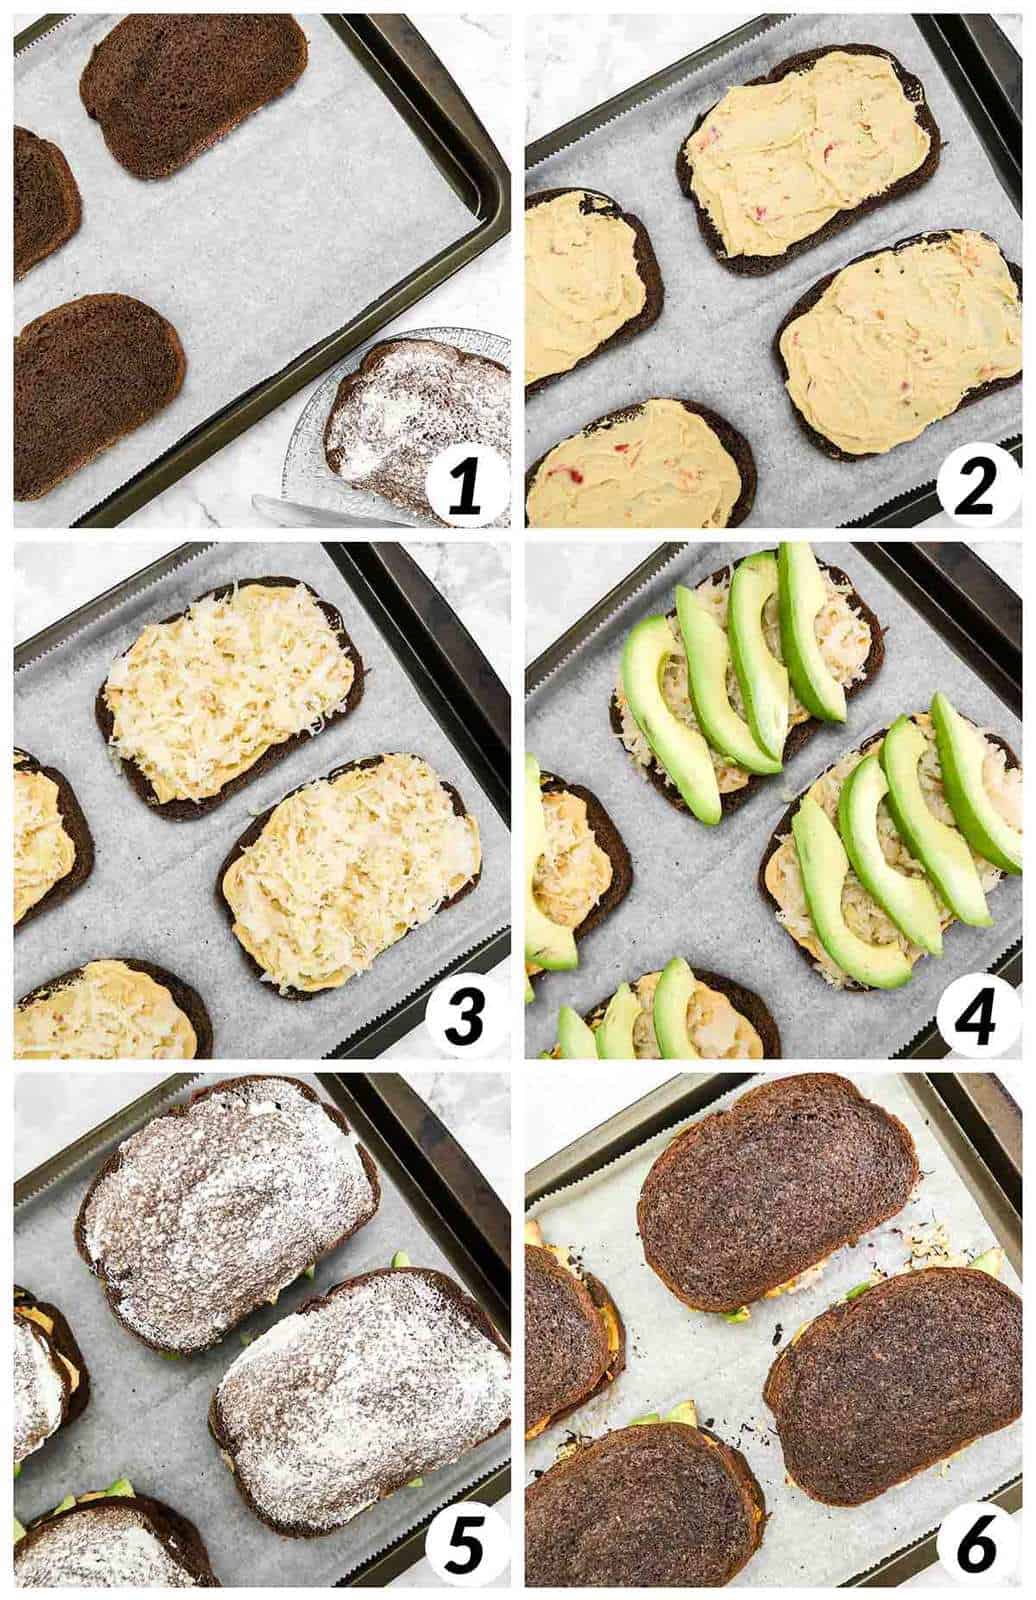 Six panel grid of process shots - assembling sandwiches on a baking sheet lined with parchment paper and baking in the oven.